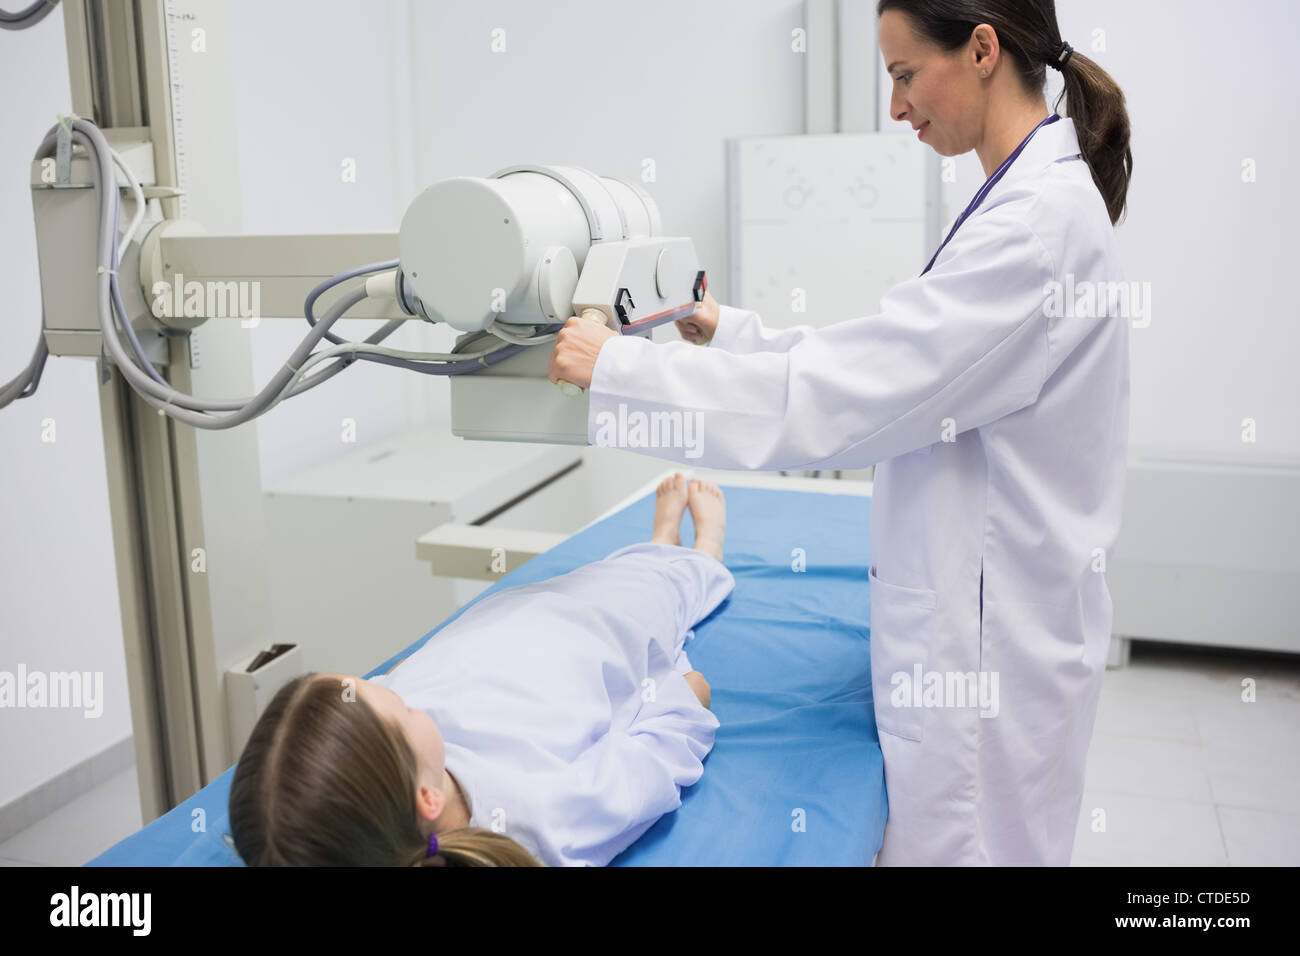 Doctor holding a radiography machine over a patient Stock Photo